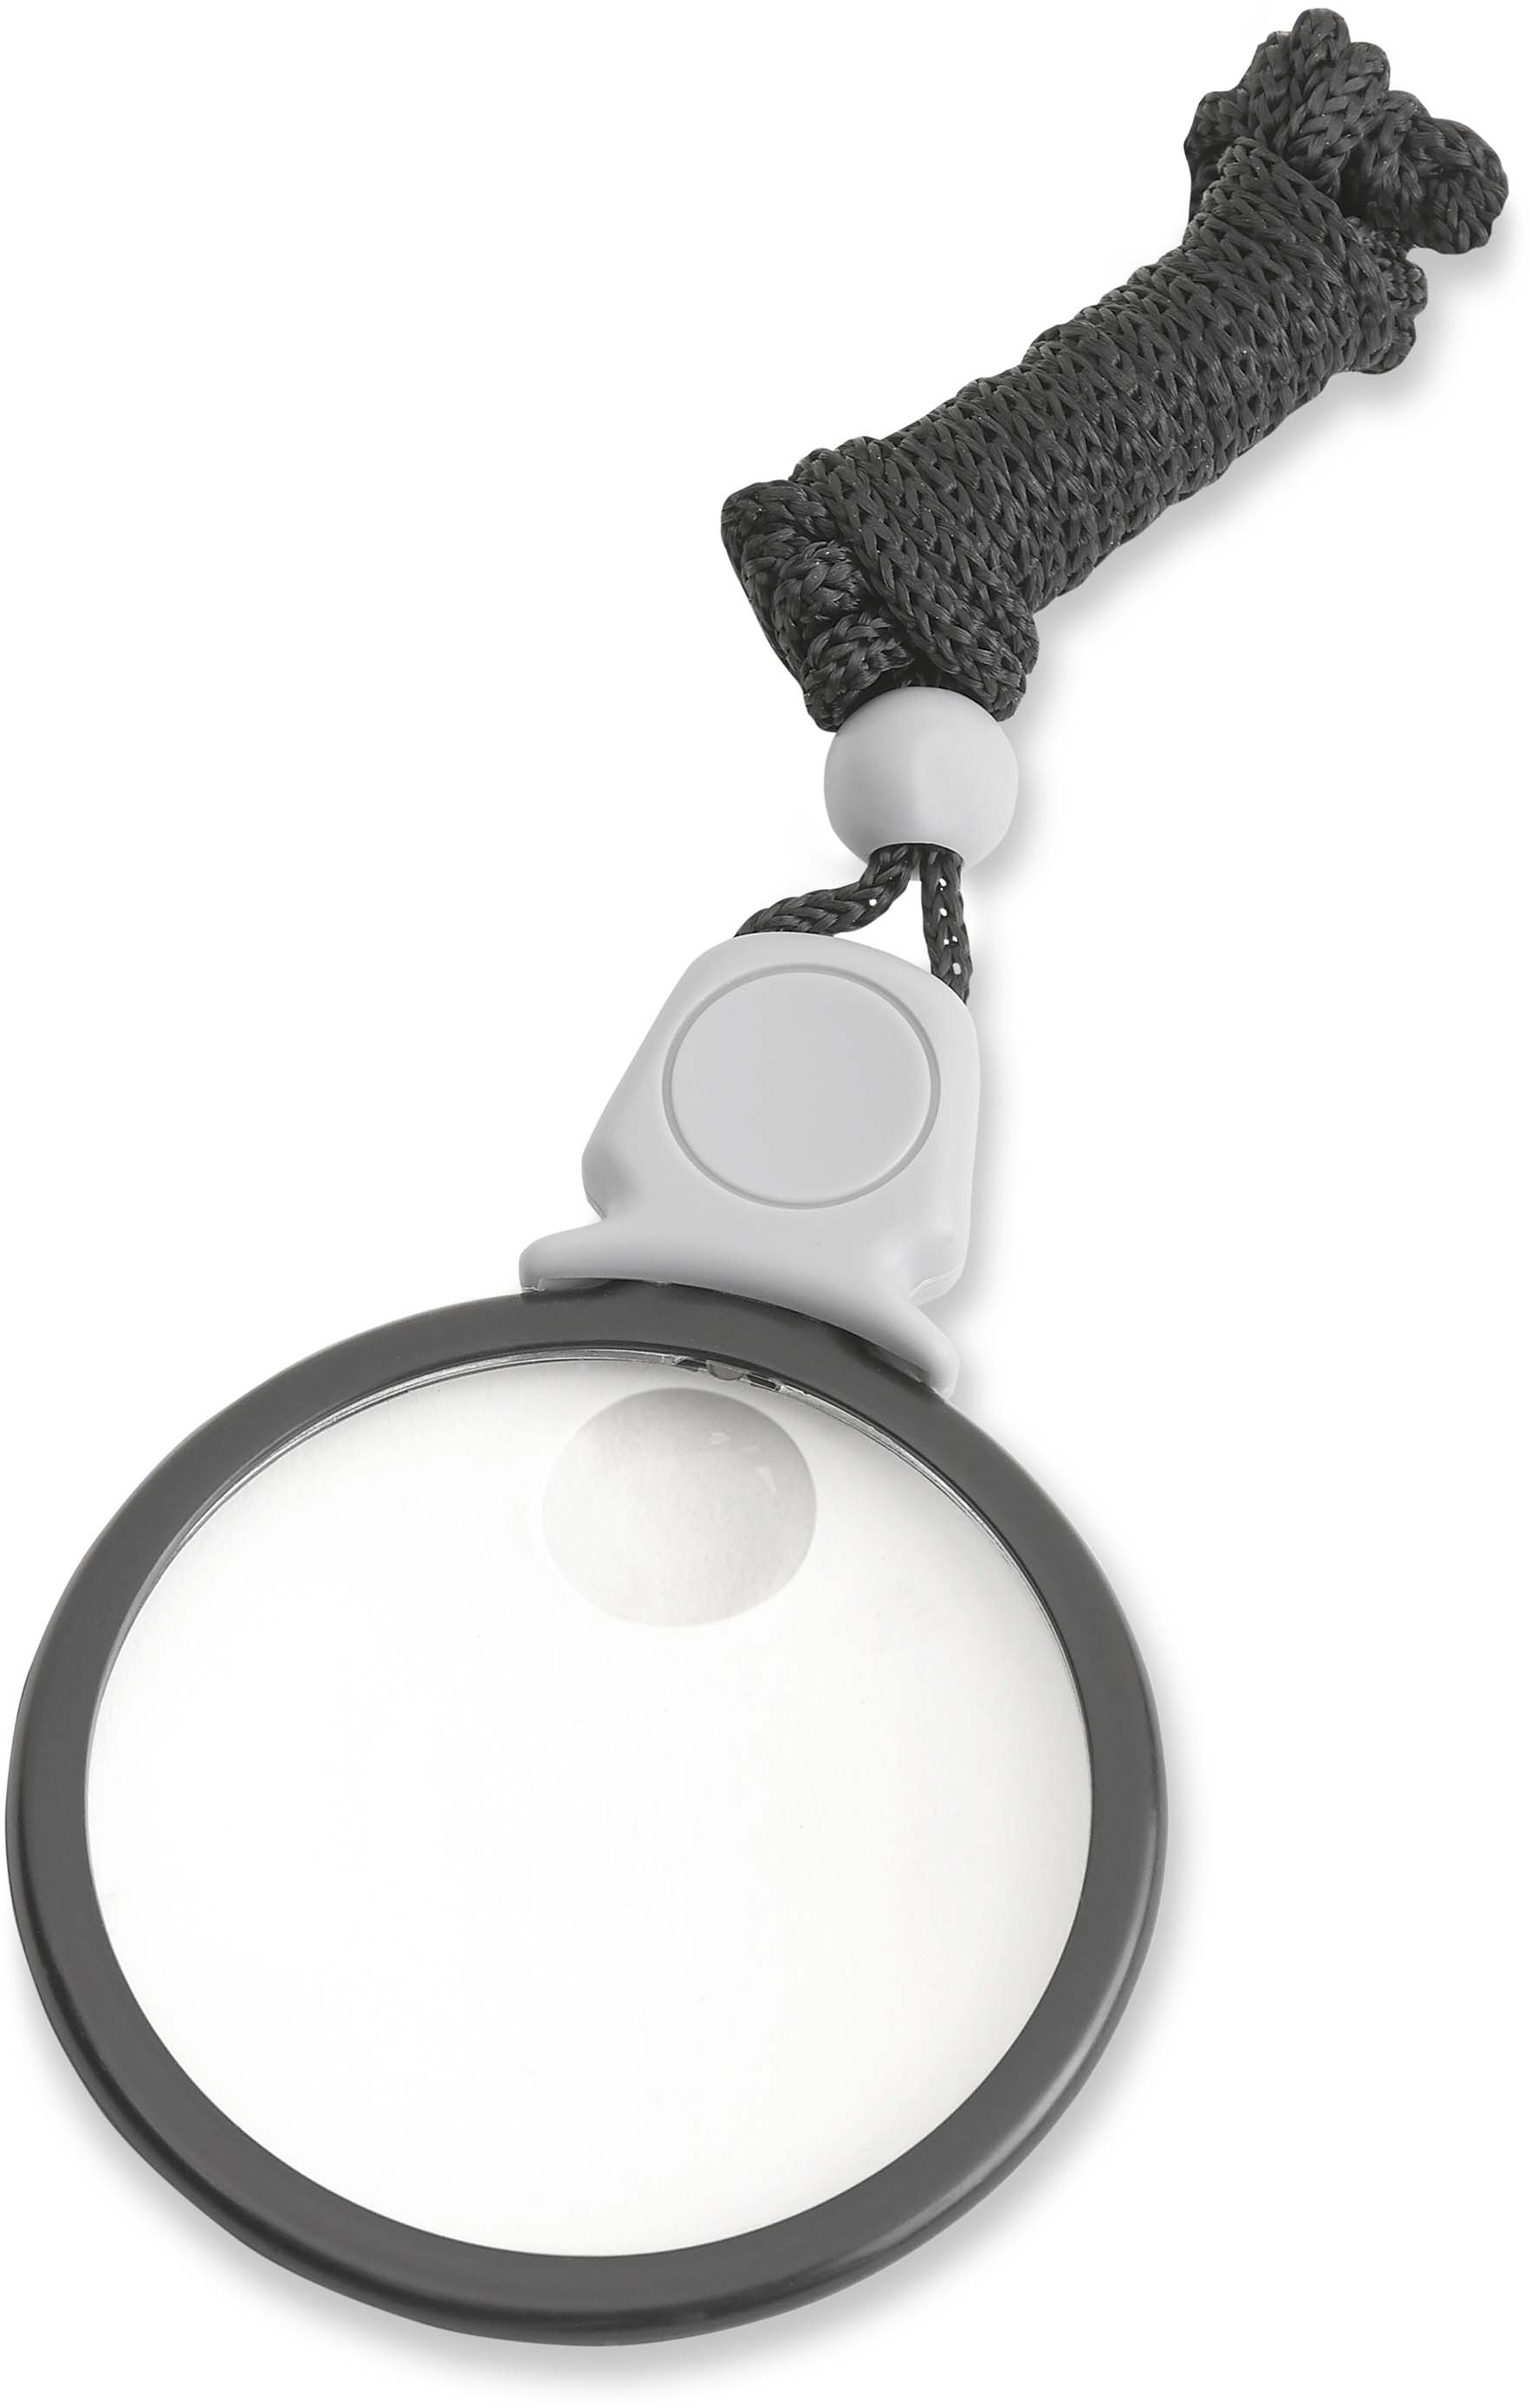 Carson MiniBrite LED Lighted Pocket Magnifier 5X